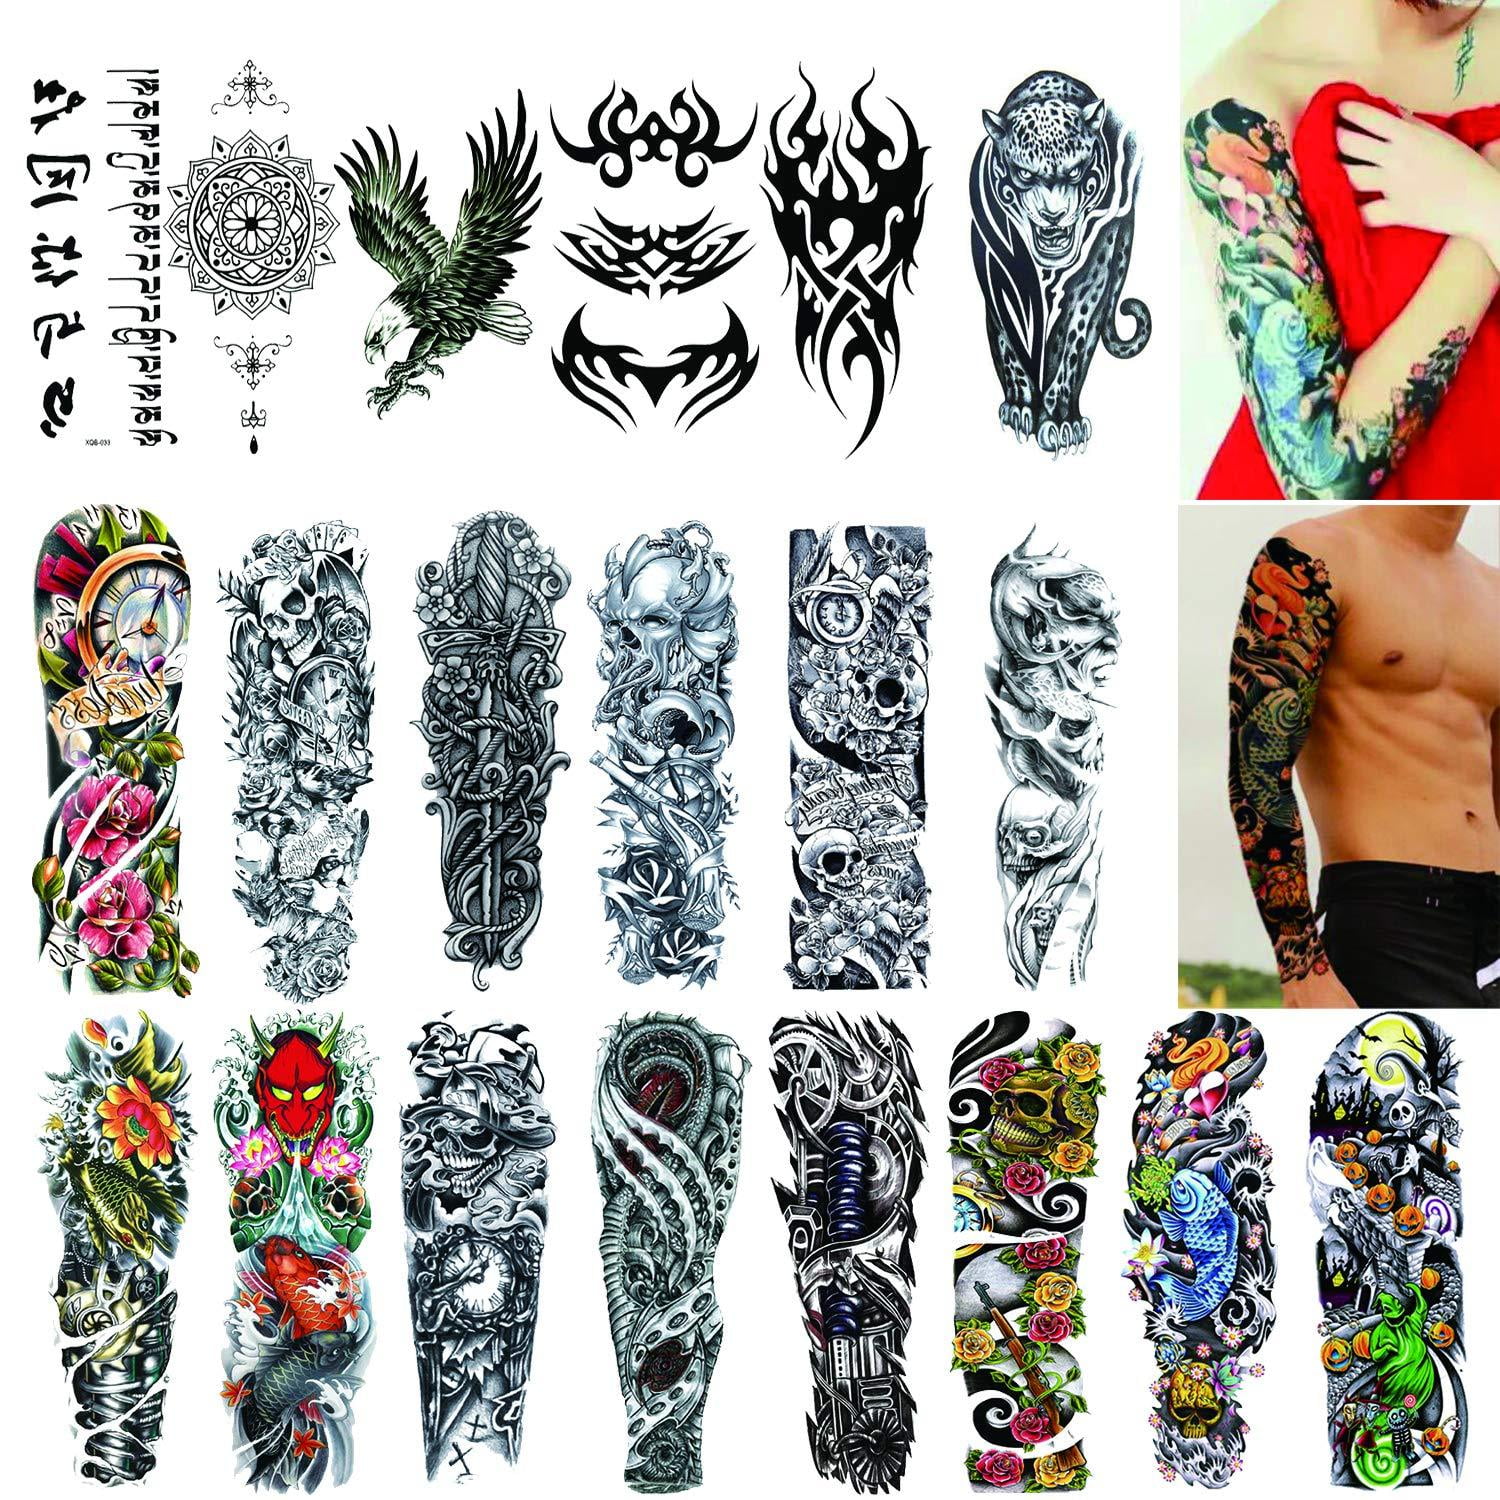 Full Arm Temporary Tattoos 20 Sheets,Tattoo Sleeves for Men and Women